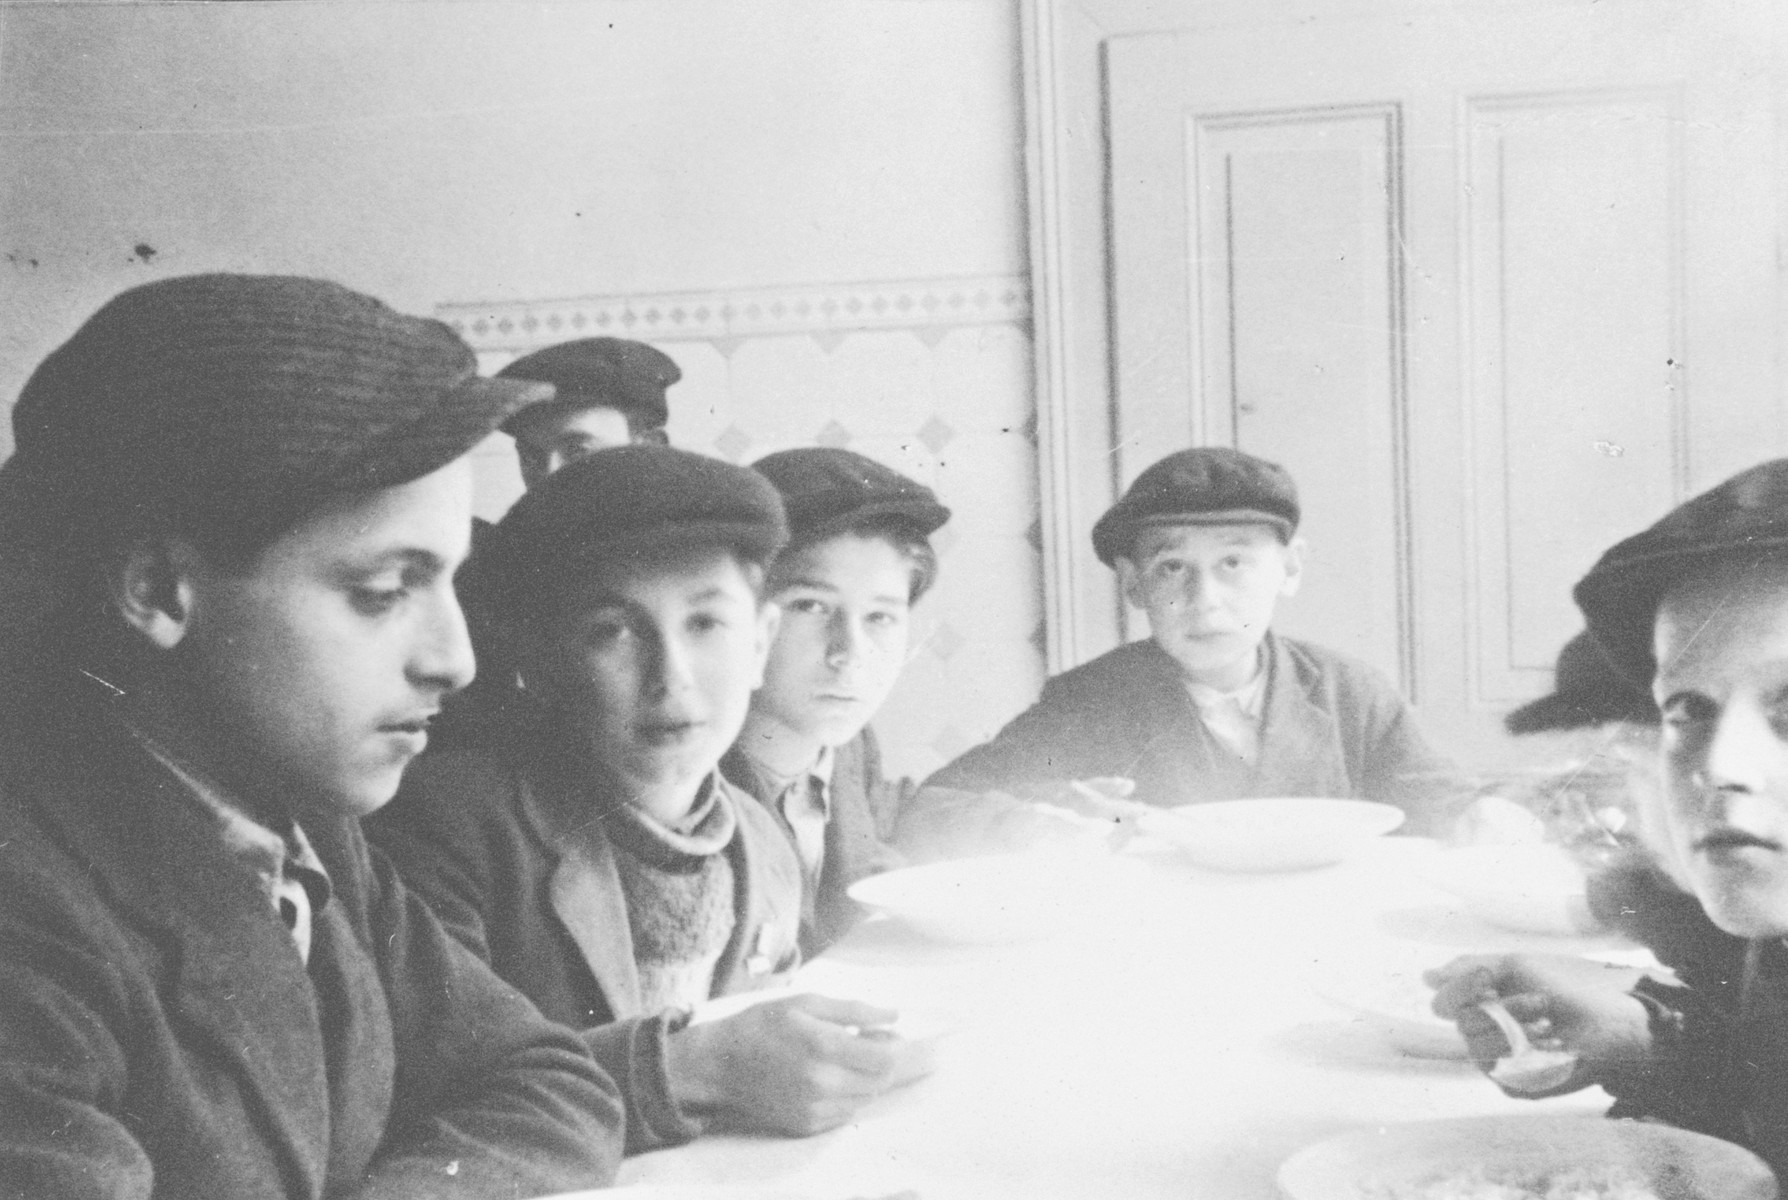 Boys and teenagers eat a meal in Bad Nauheim, a children's home run by the Vaad Hatzala.